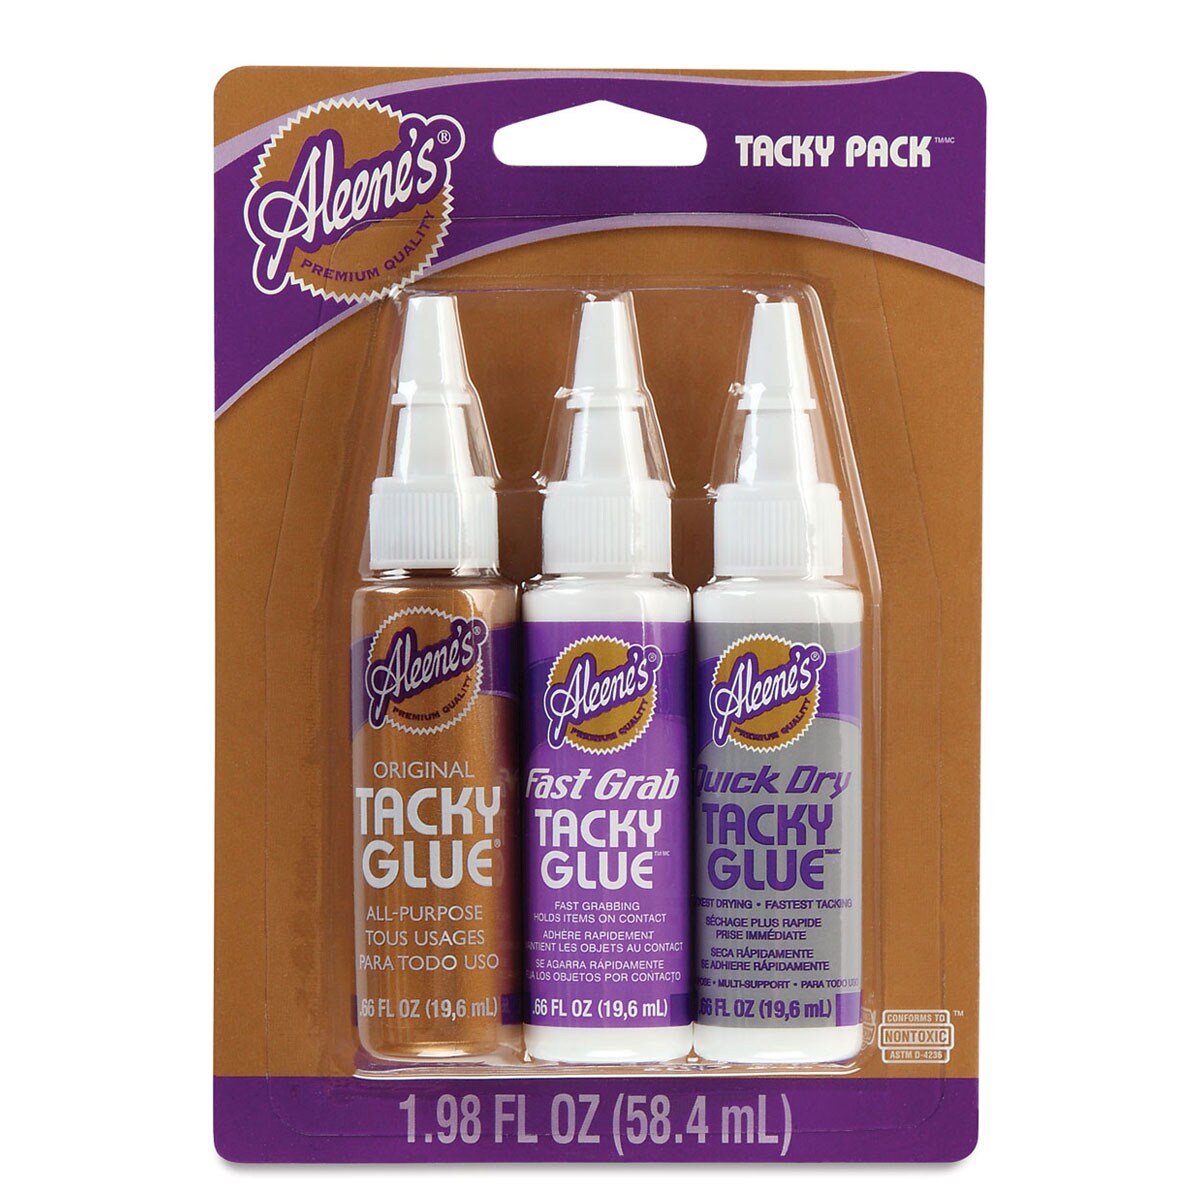 Instant Glass Glue, 3 Pack